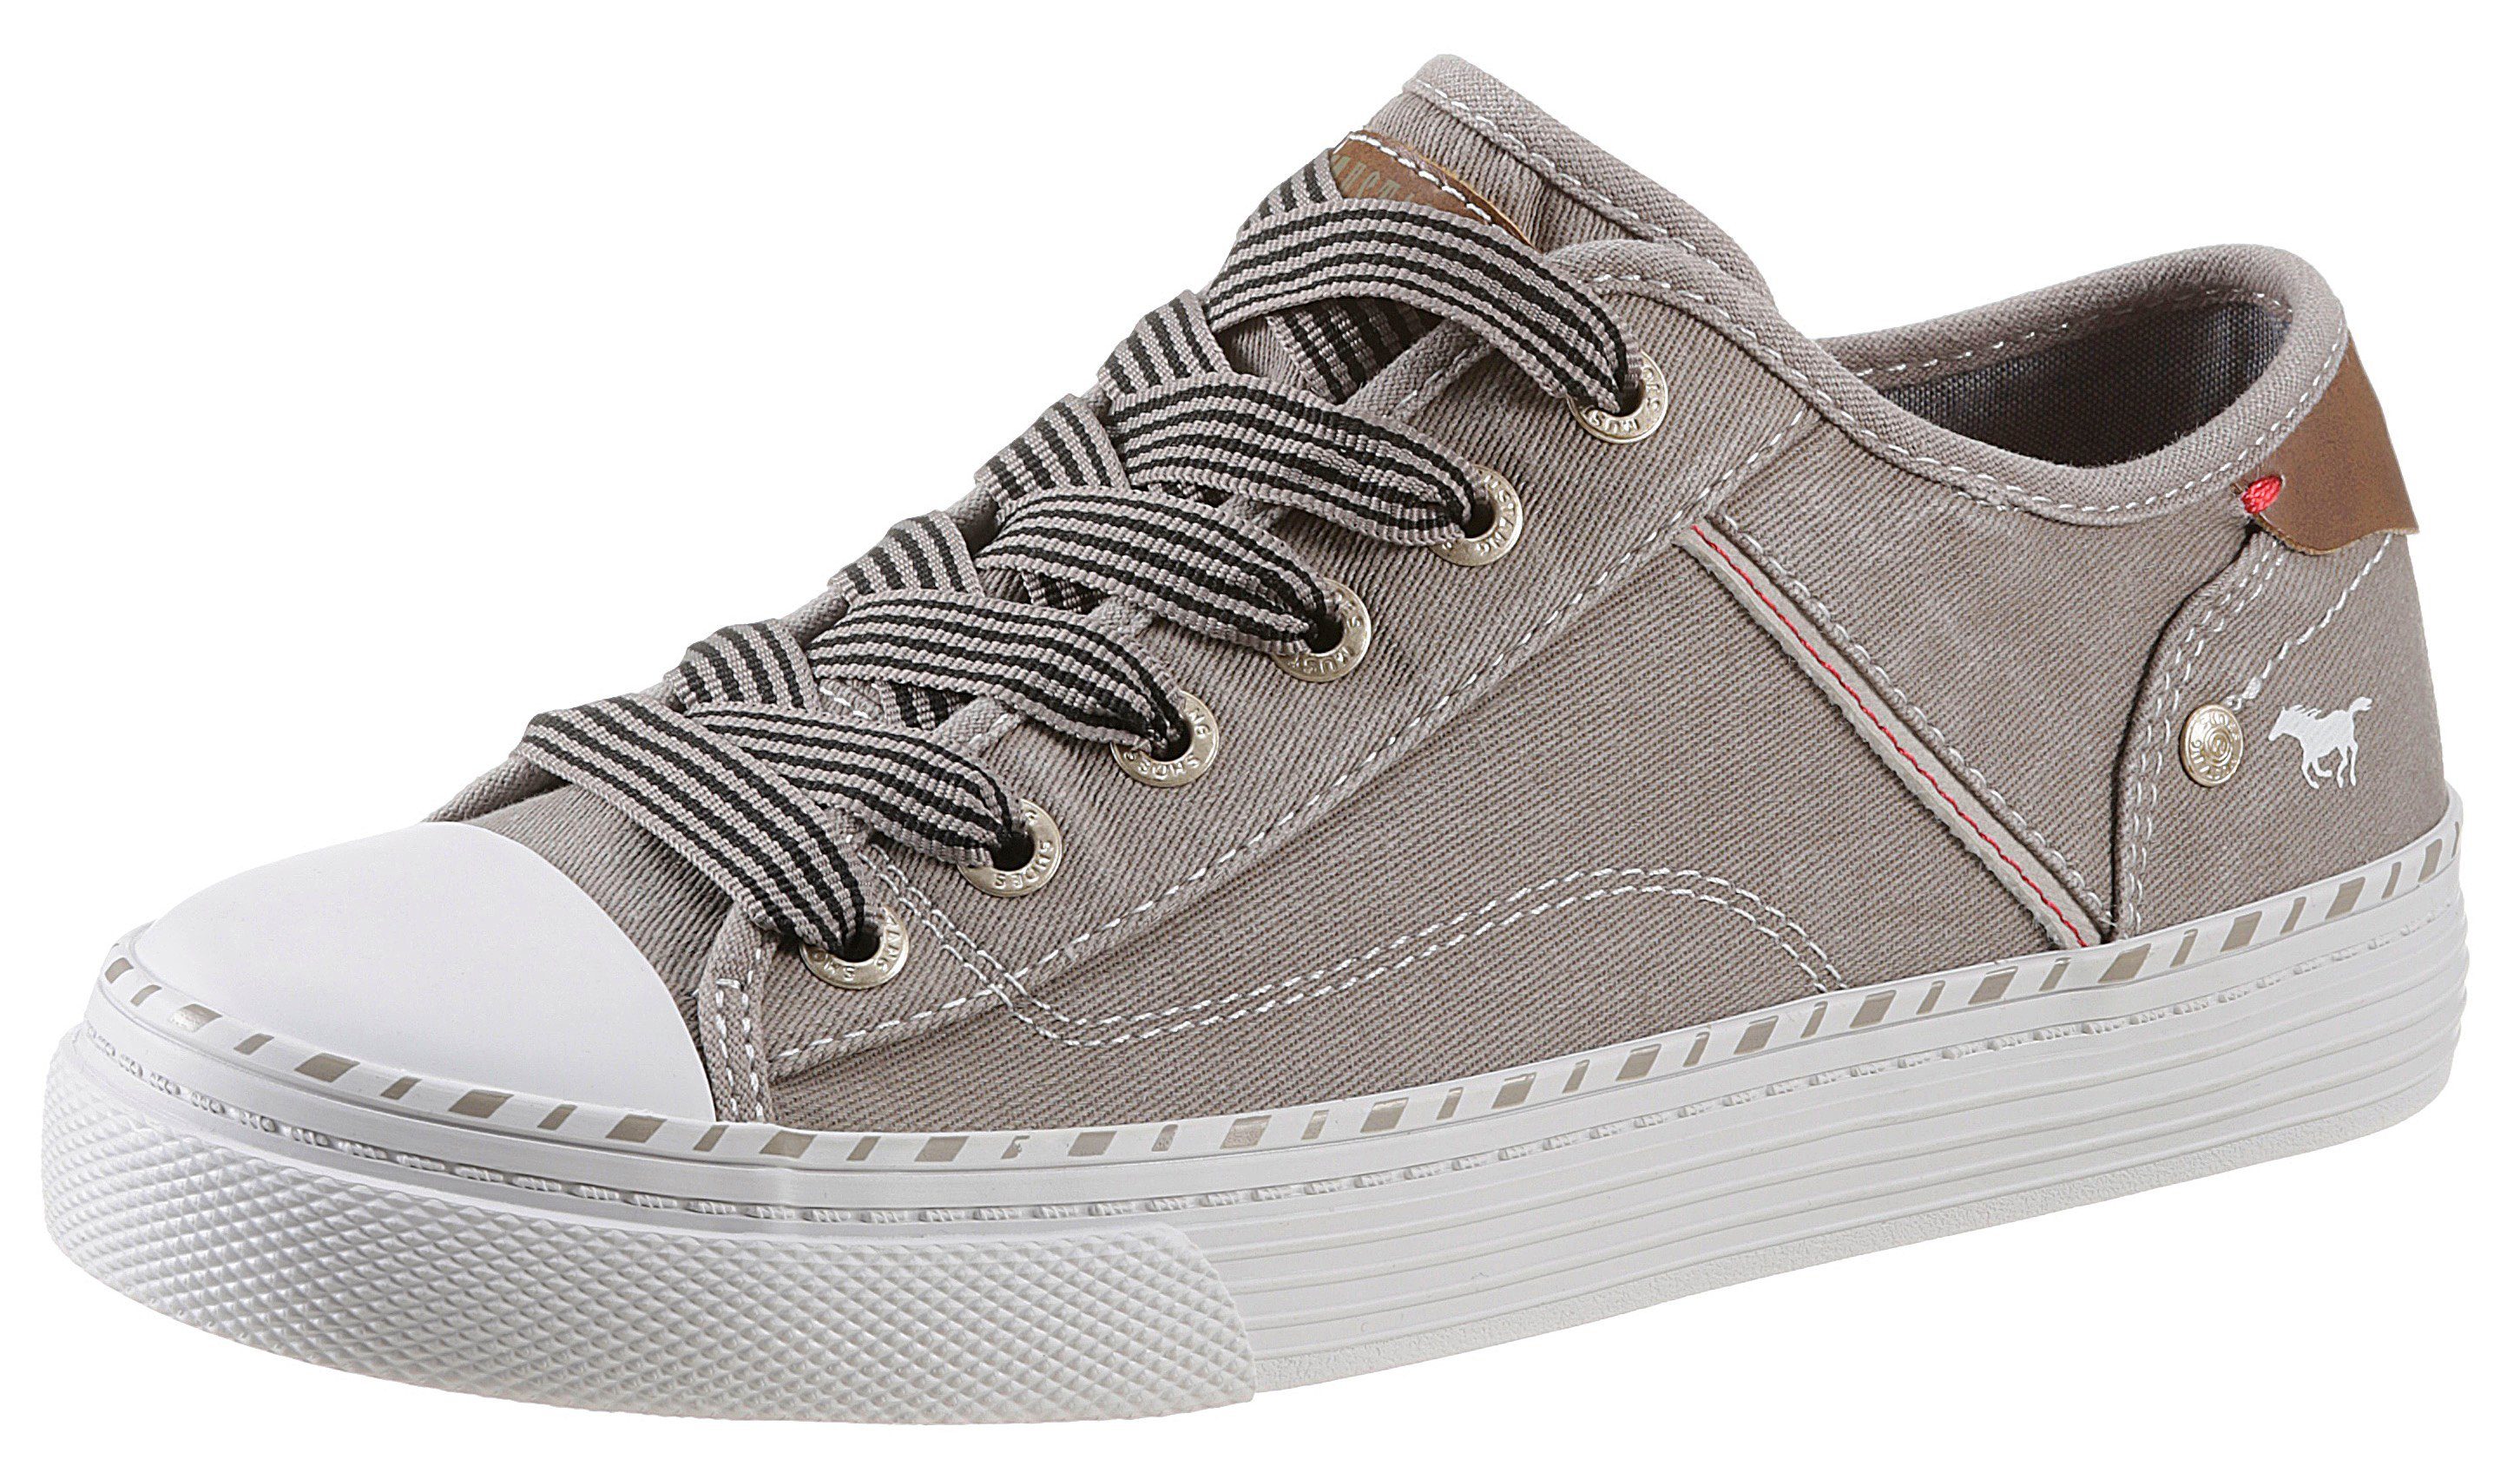 Shoes Sneaker Mustang 3 mit Plateausohle cm taupe